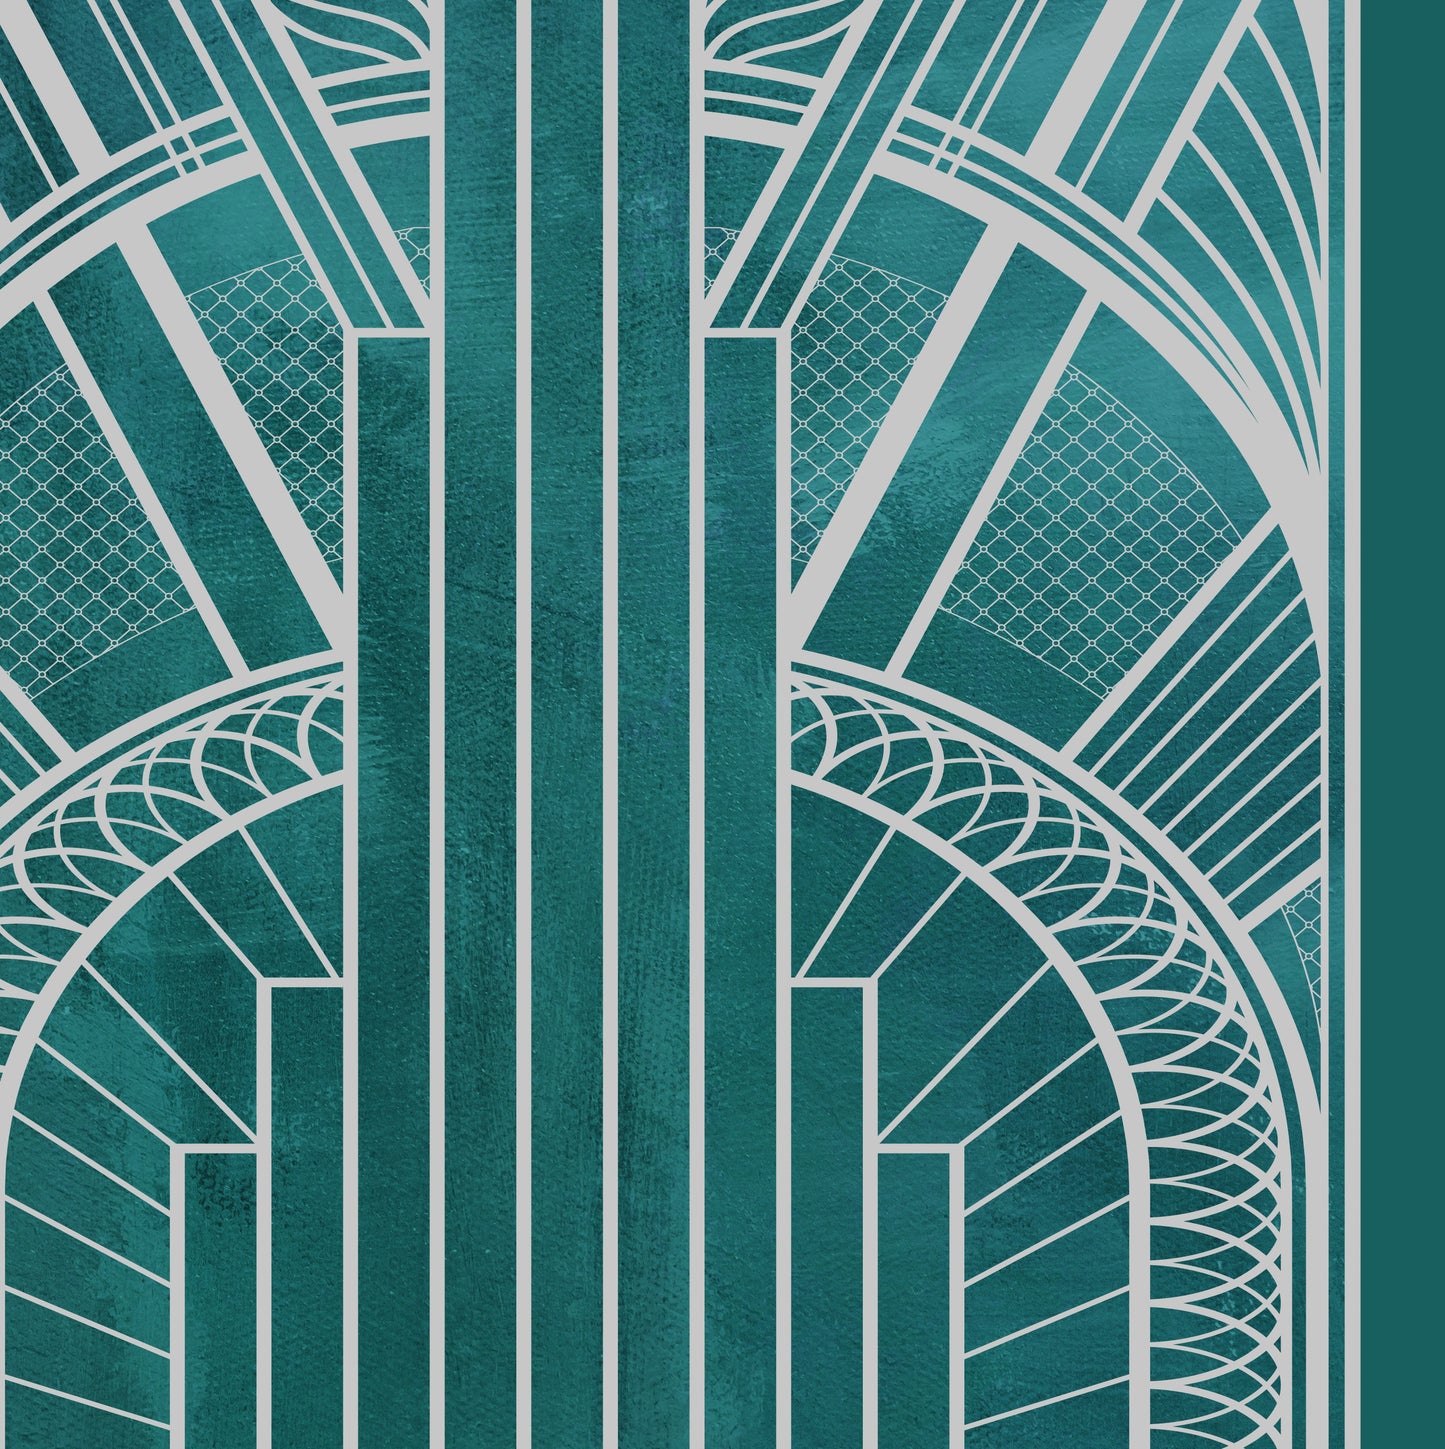 Close up detail of an art deco pattern print in silver and teal